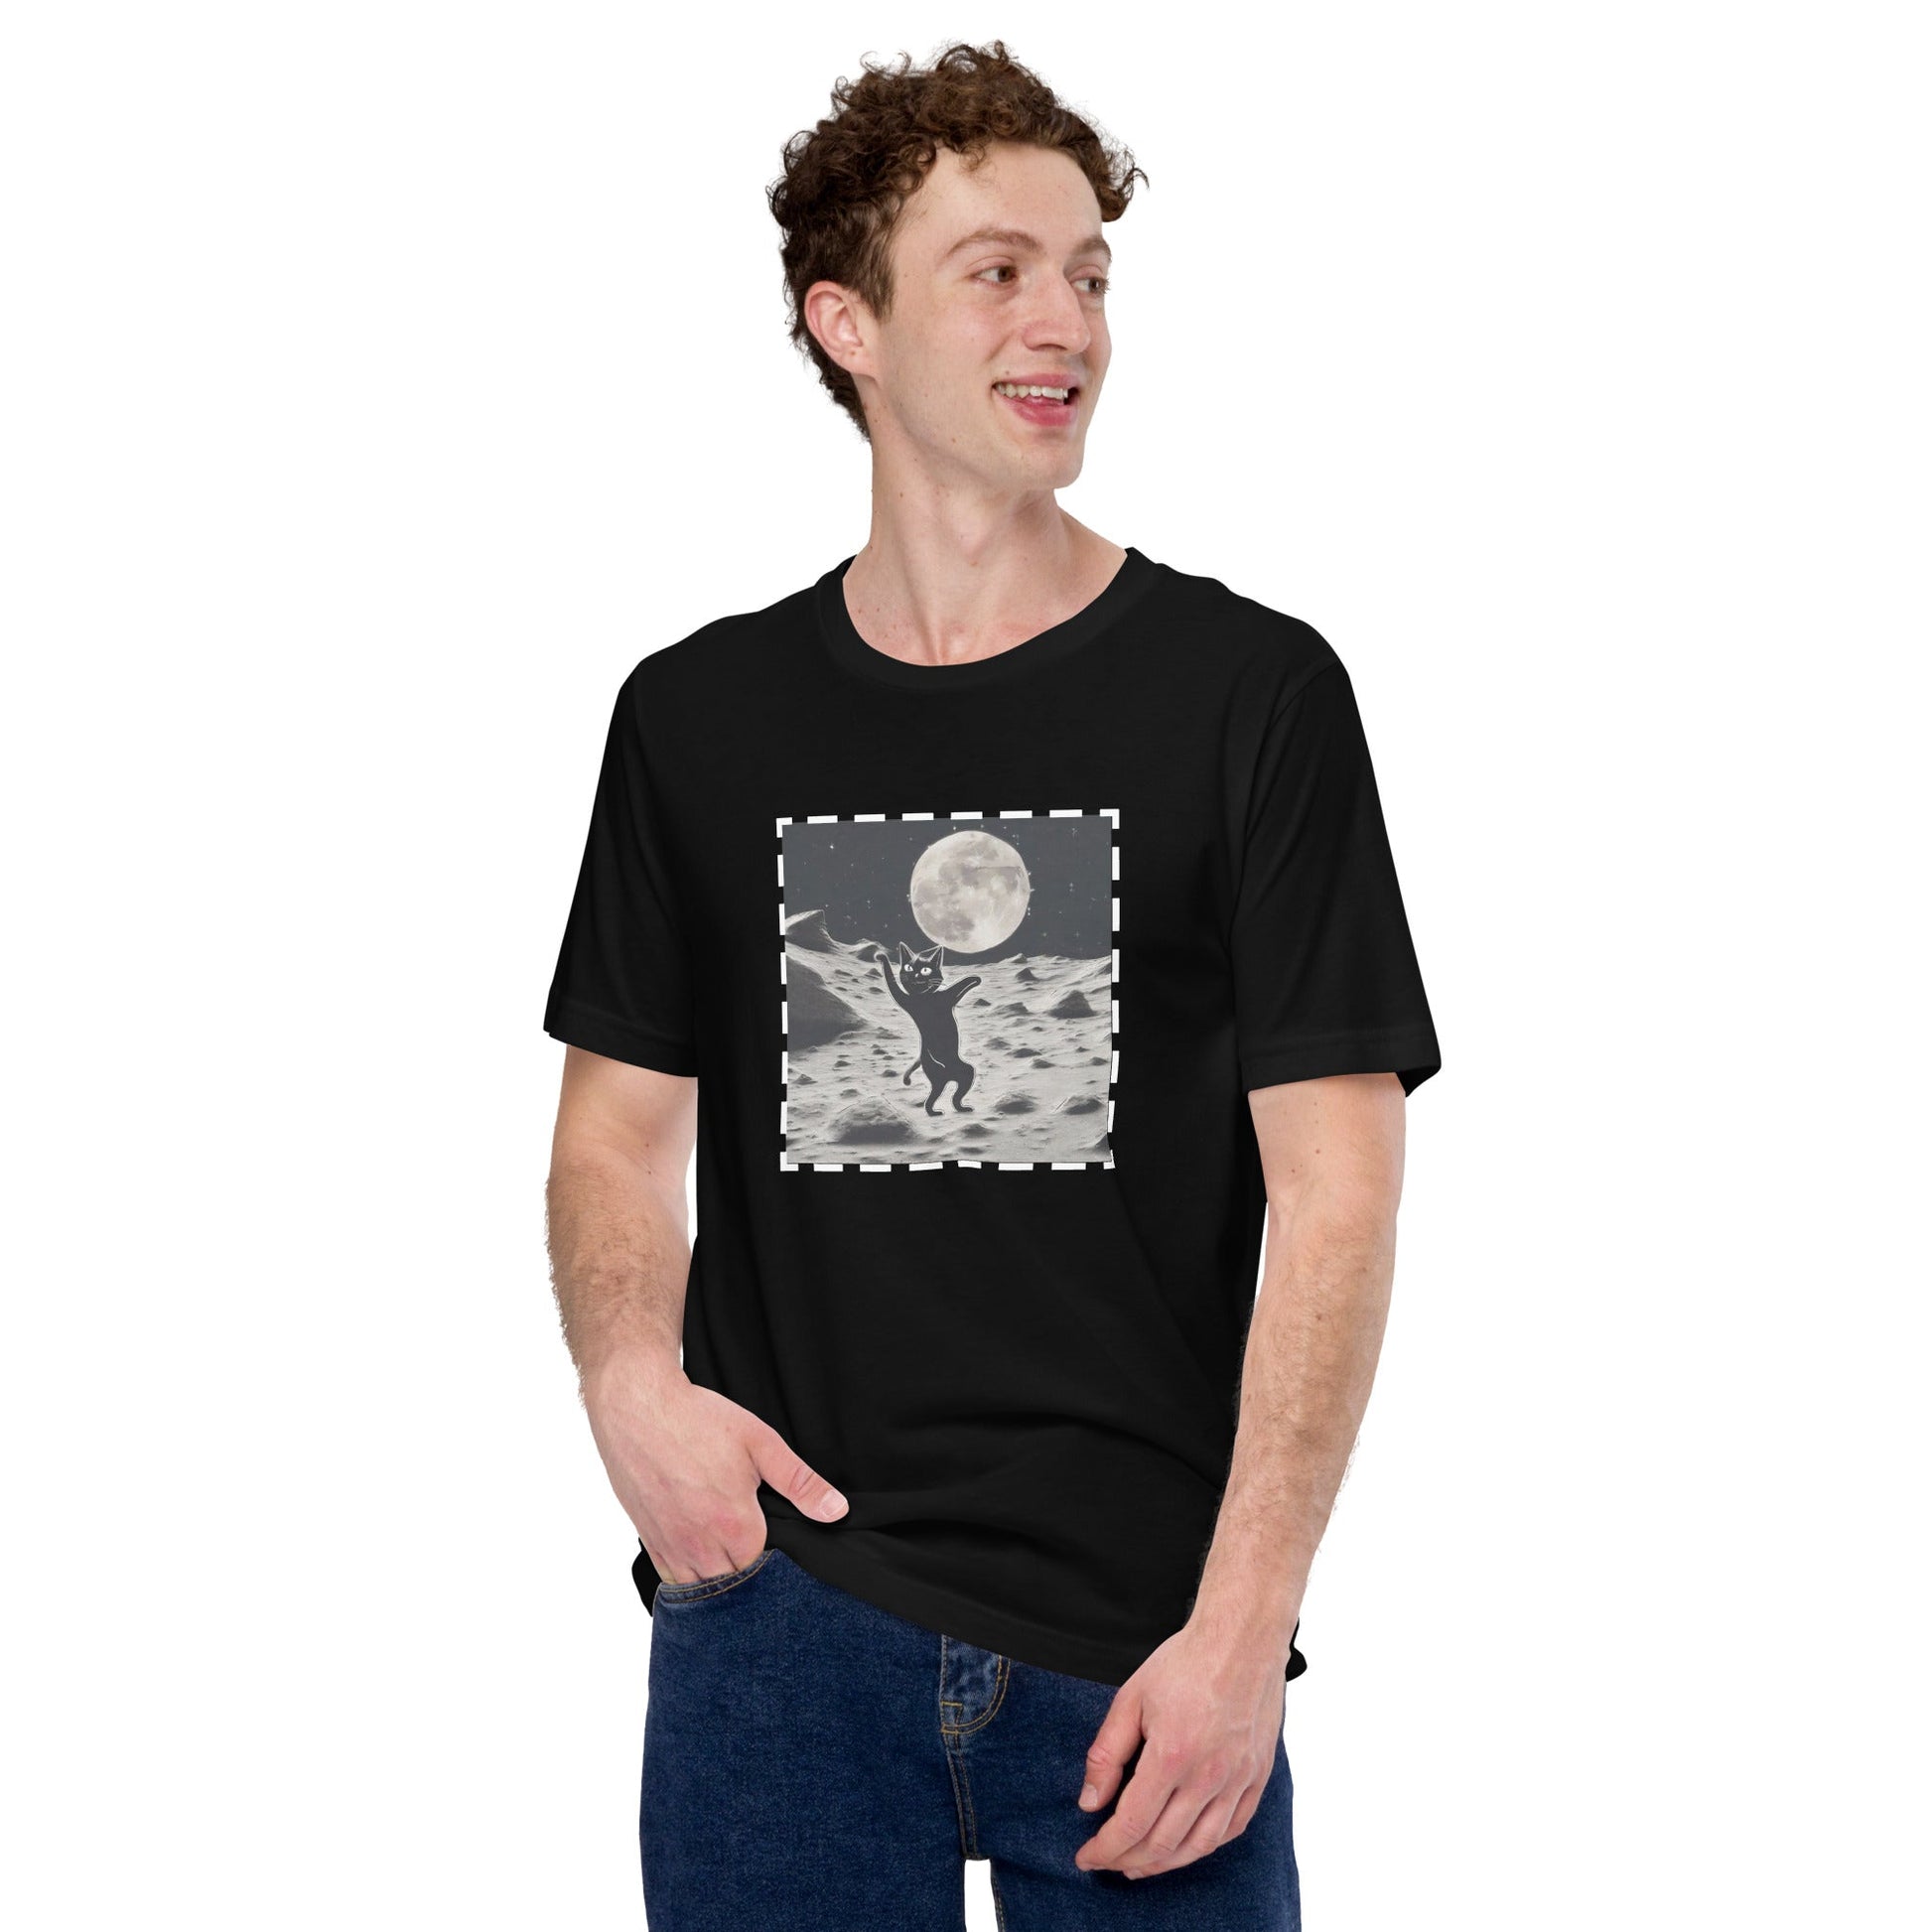 Be Extra! Dancing on a Moon Unisex T-shirt - BeExtra! Apparel & More